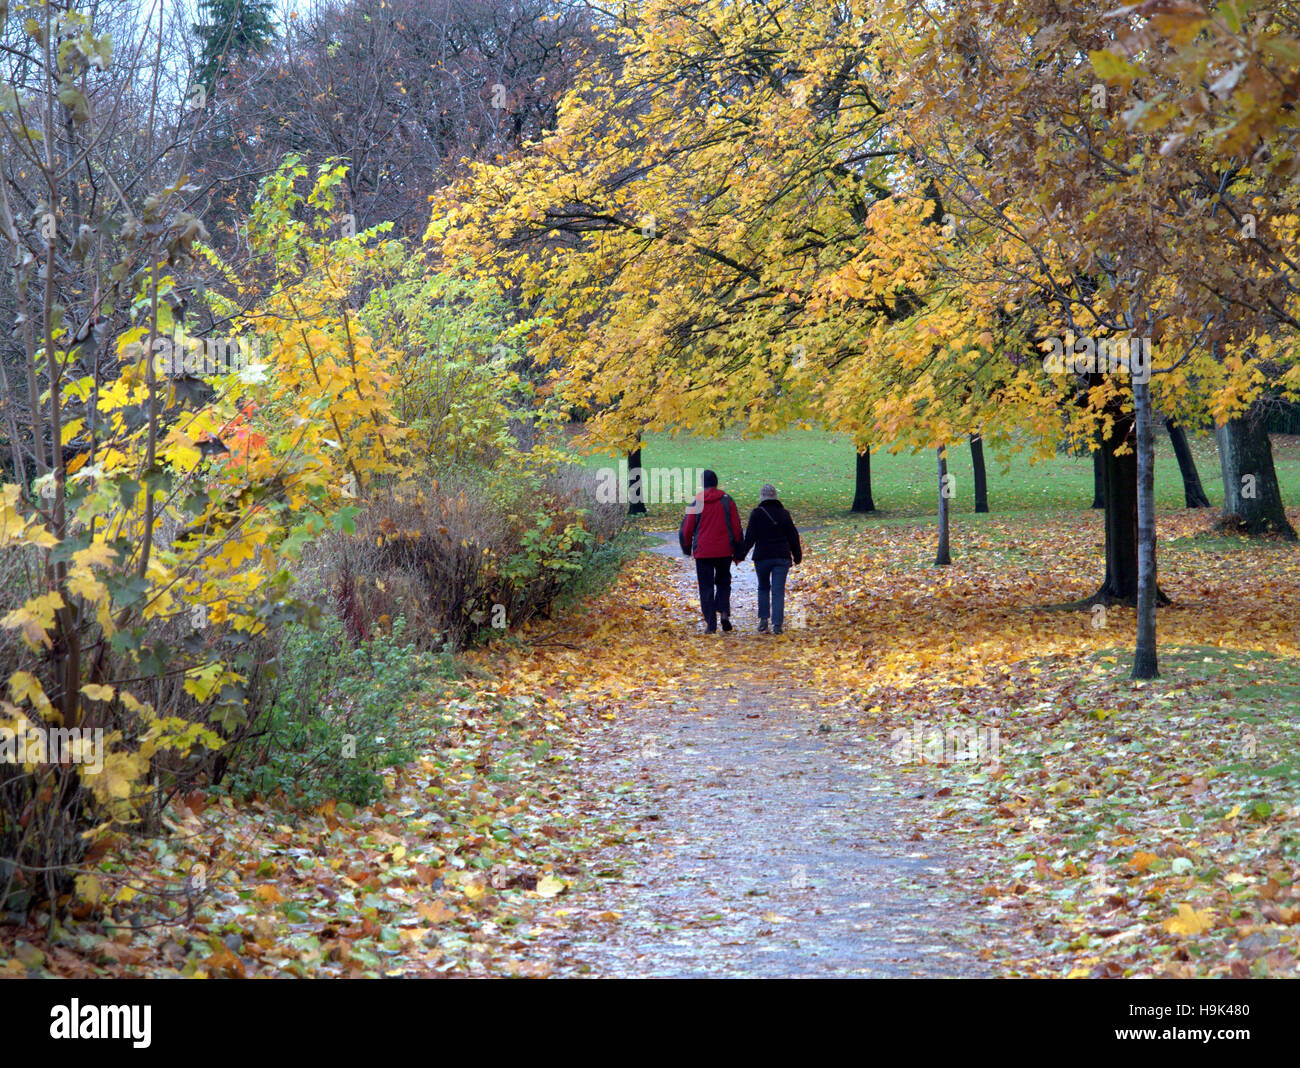 Glasgow park scene couple holding hands and walking on path or road Stock Photo